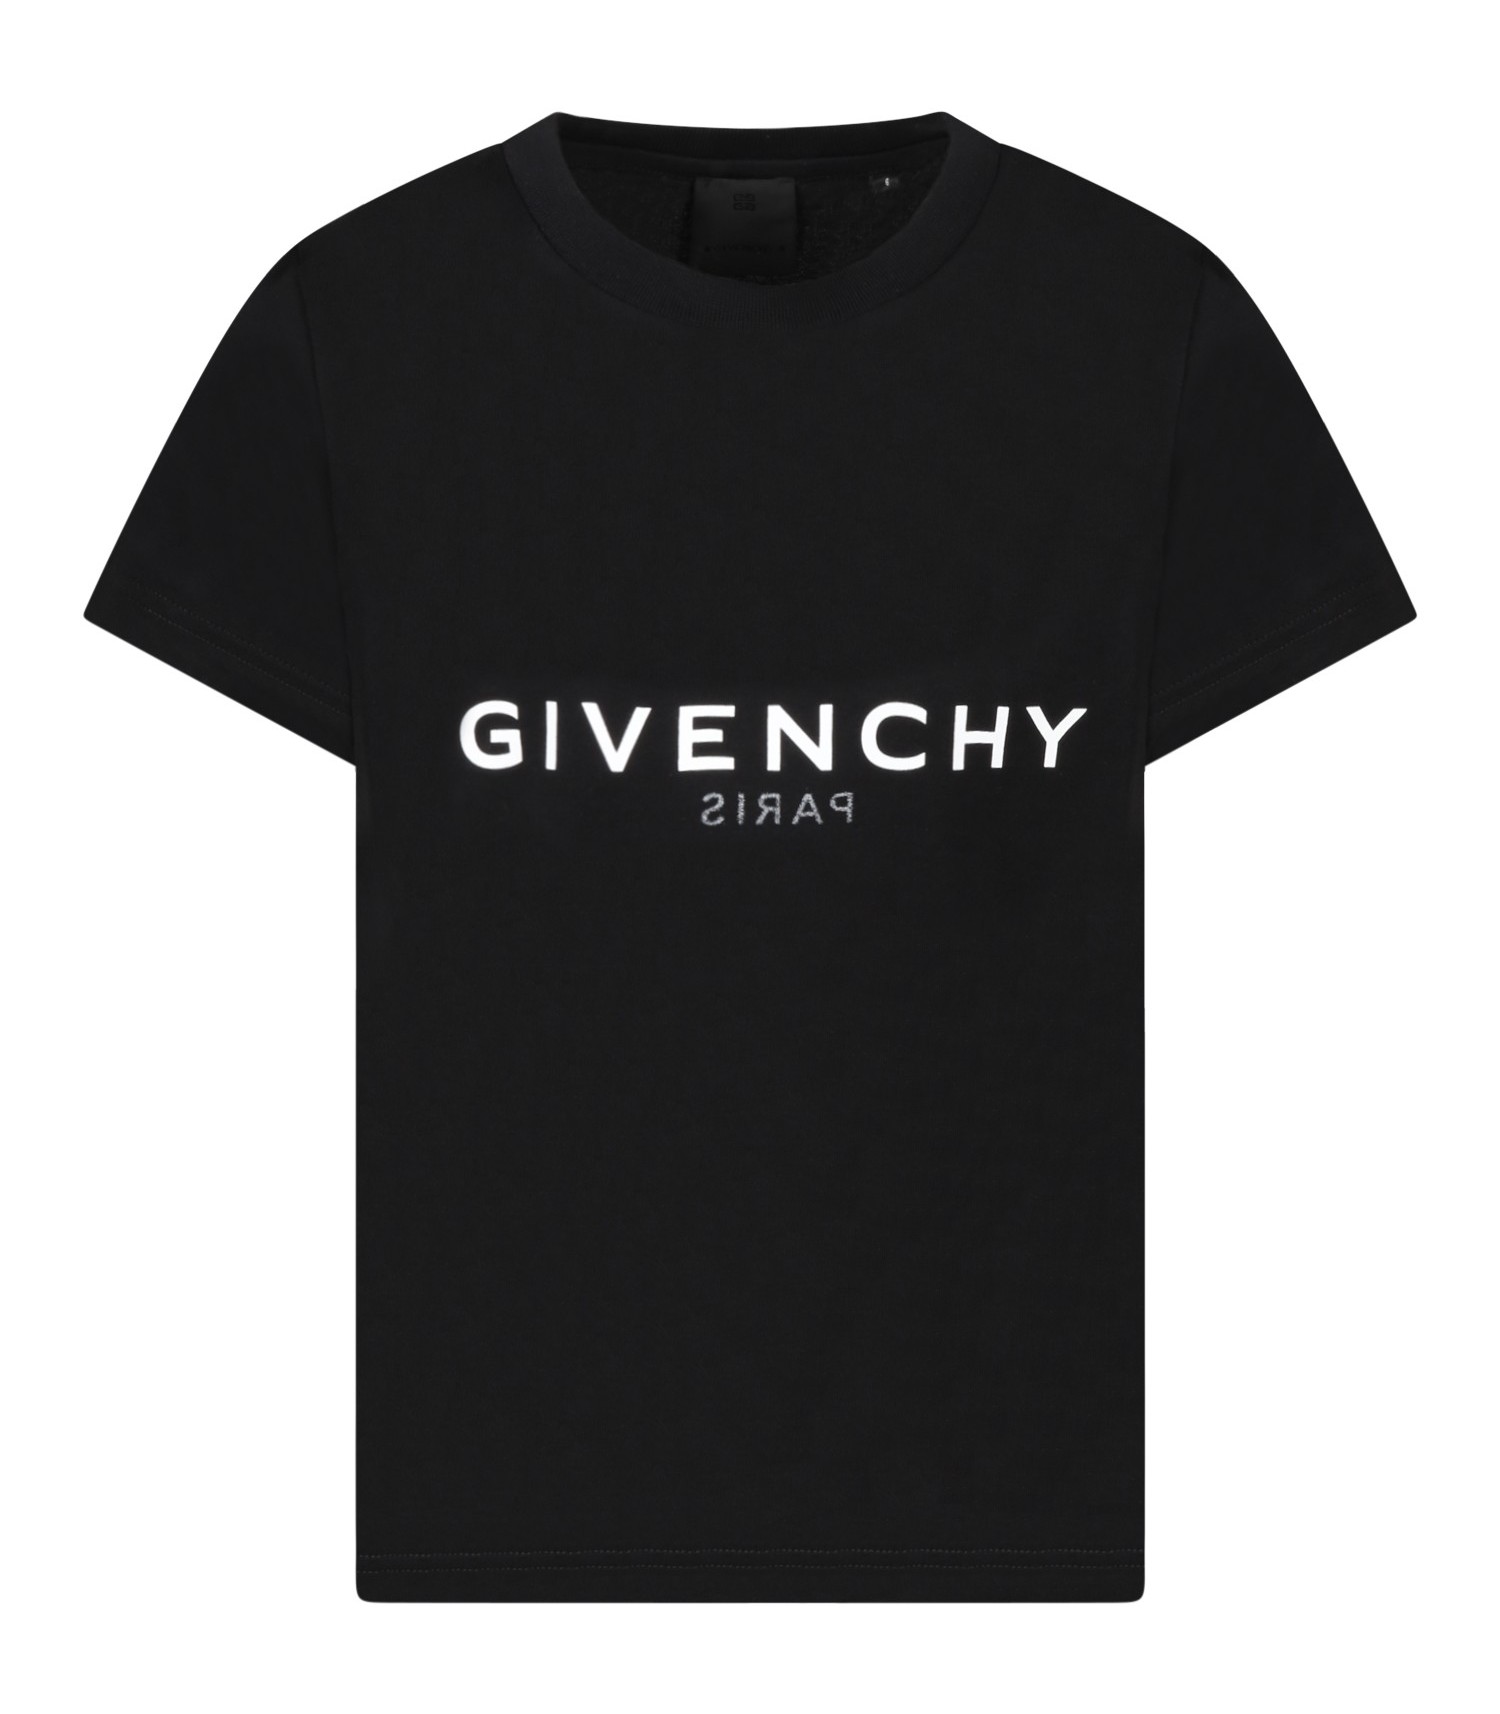 Givenchy Kids Black T-shirt for kids with white and gray logo